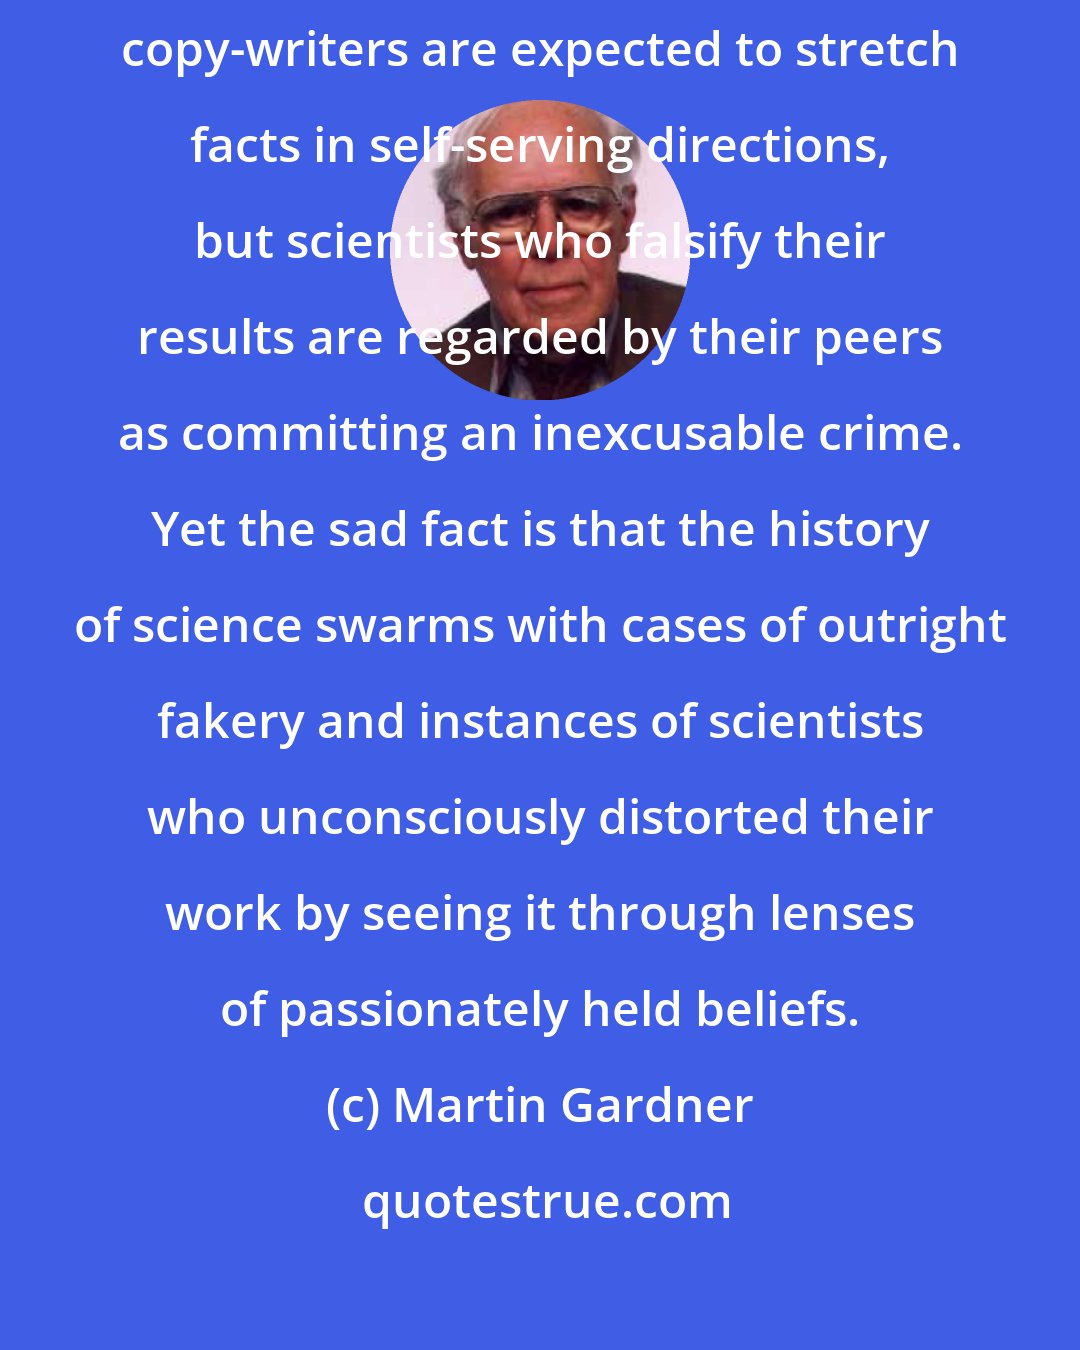 Martin Gardner: Politicians, real-estate agents, used-car salesmen, and advertising copy-writers are expected to stretch facts in self-serving directions, but scientists who falsify their results are regarded by their peers as committing an inexcusable crime. Yet the sad fact is that the history of science swarms with cases of outright fakery and instances of scientists who unconsciously distorted their work by seeing it through lenses of passionately held beliefs.